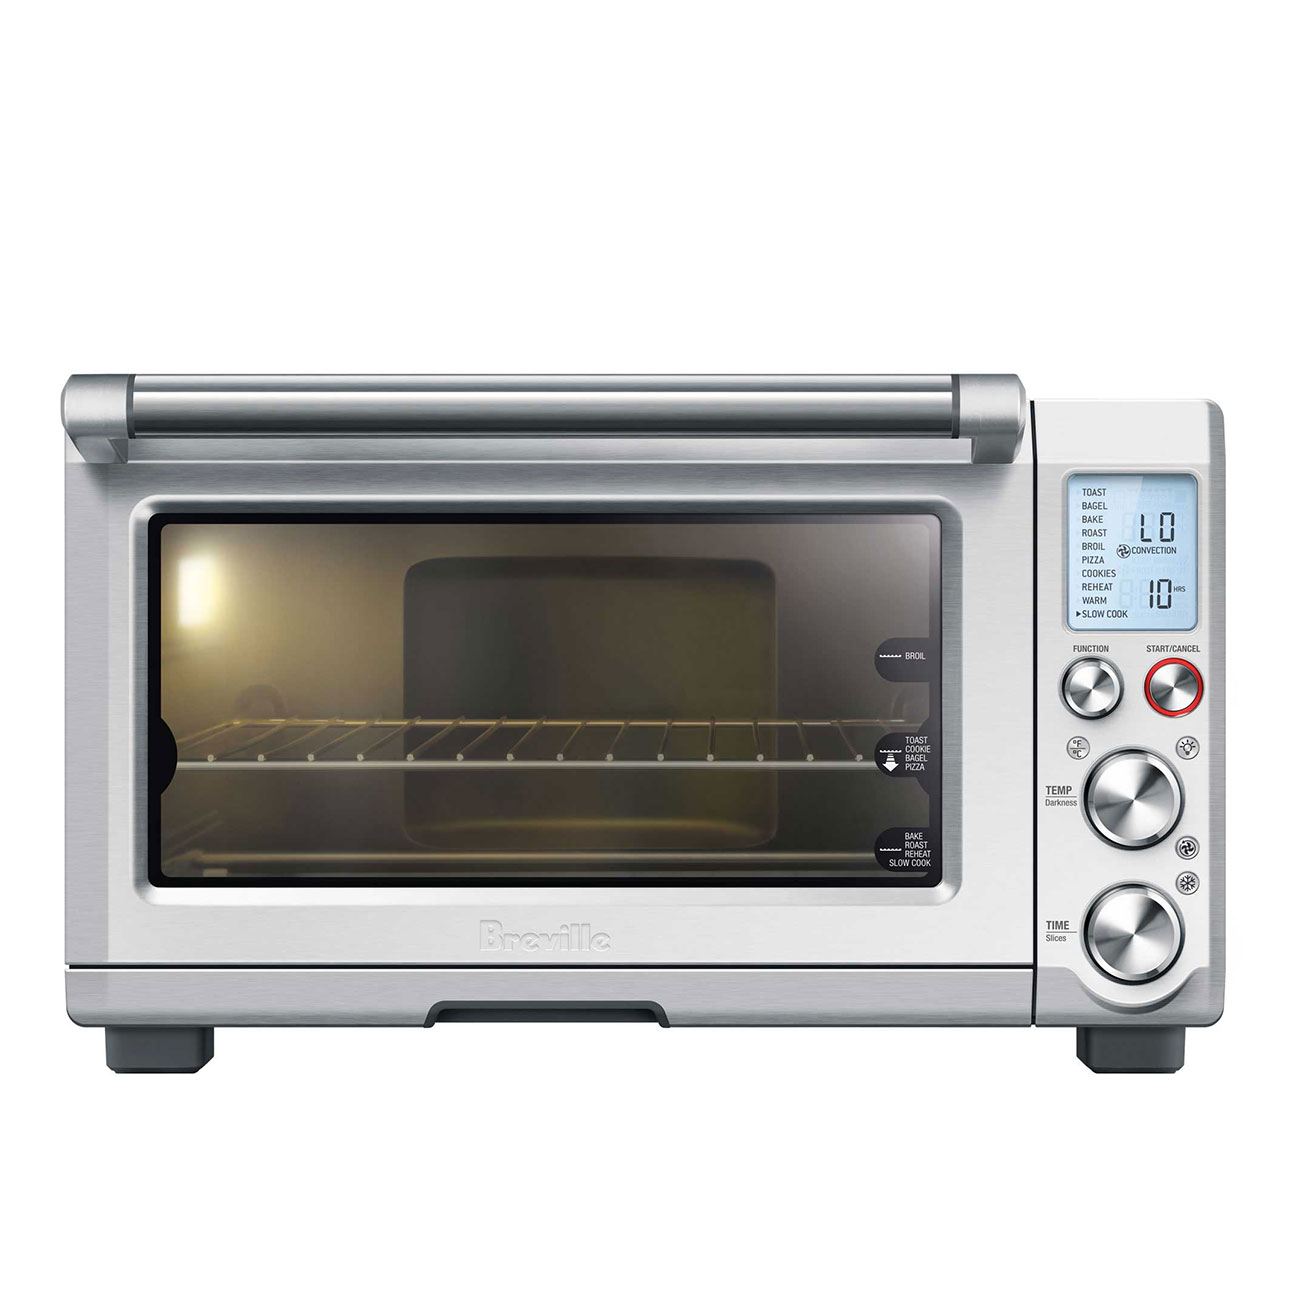 The Smart Oven Pro Convection Oven Breville